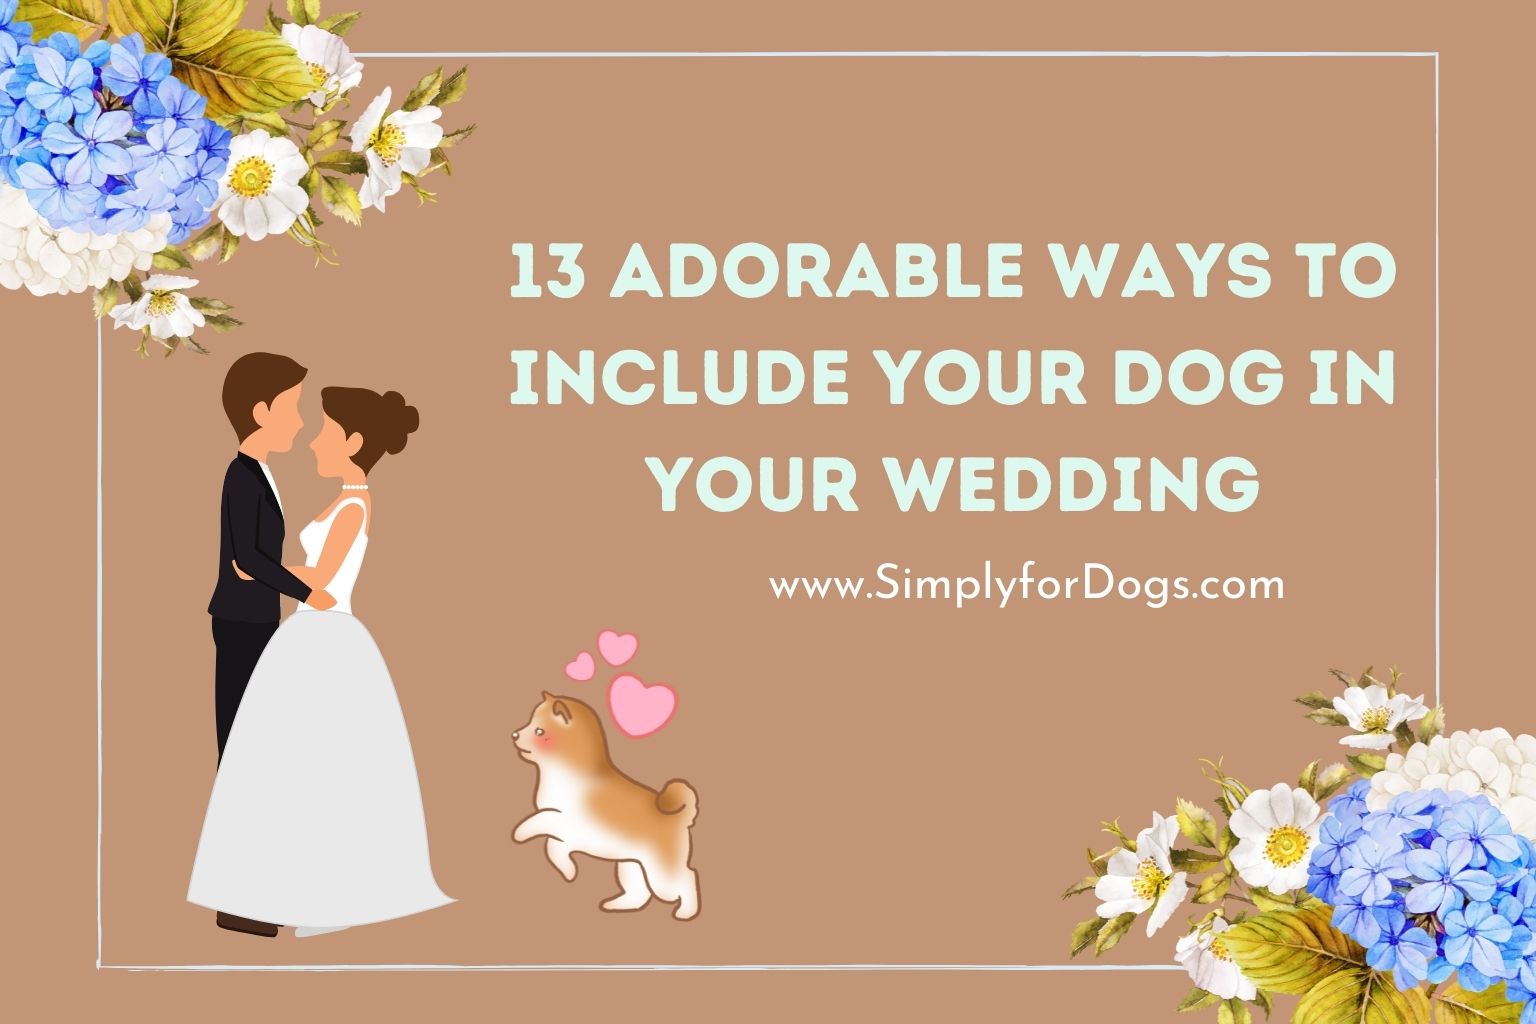 13 Adorable Ways to Include Your Dog in Your Wedding